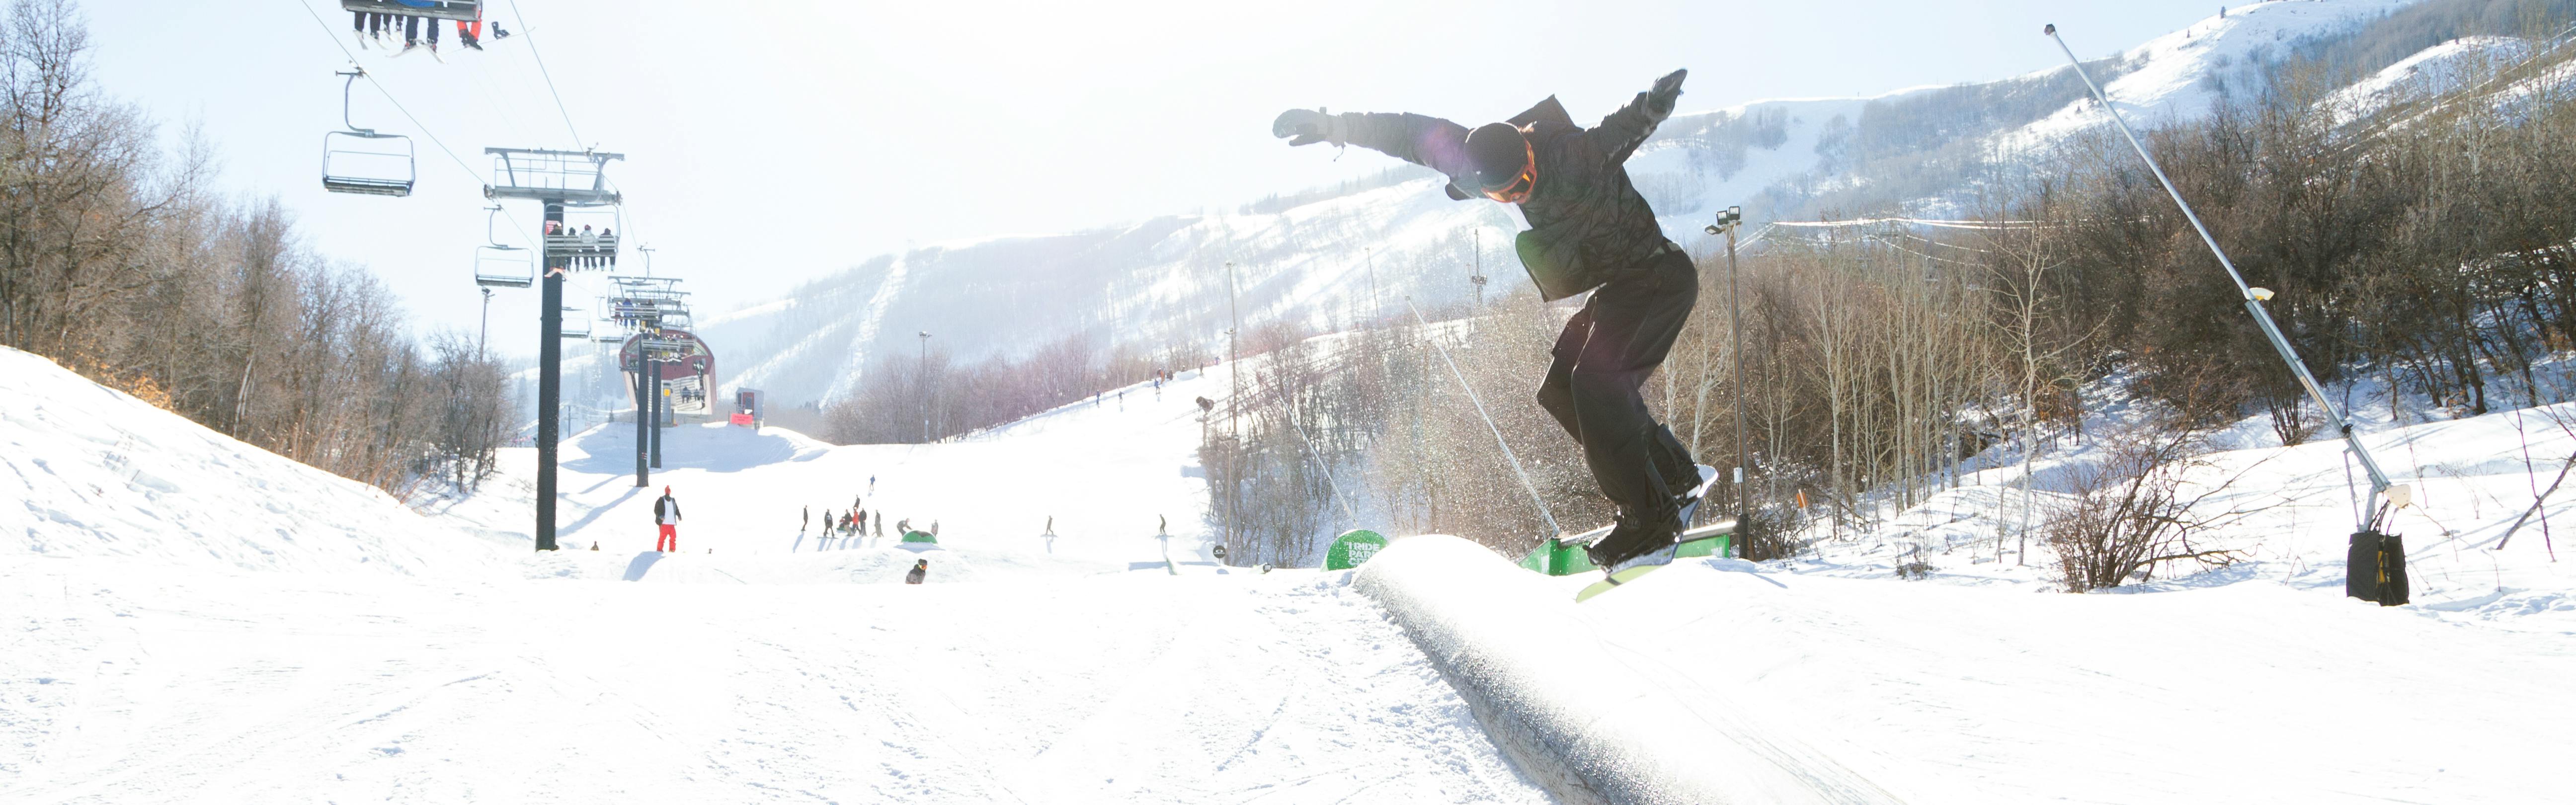 A snowboarder hits a feature in a park at a ski resort.